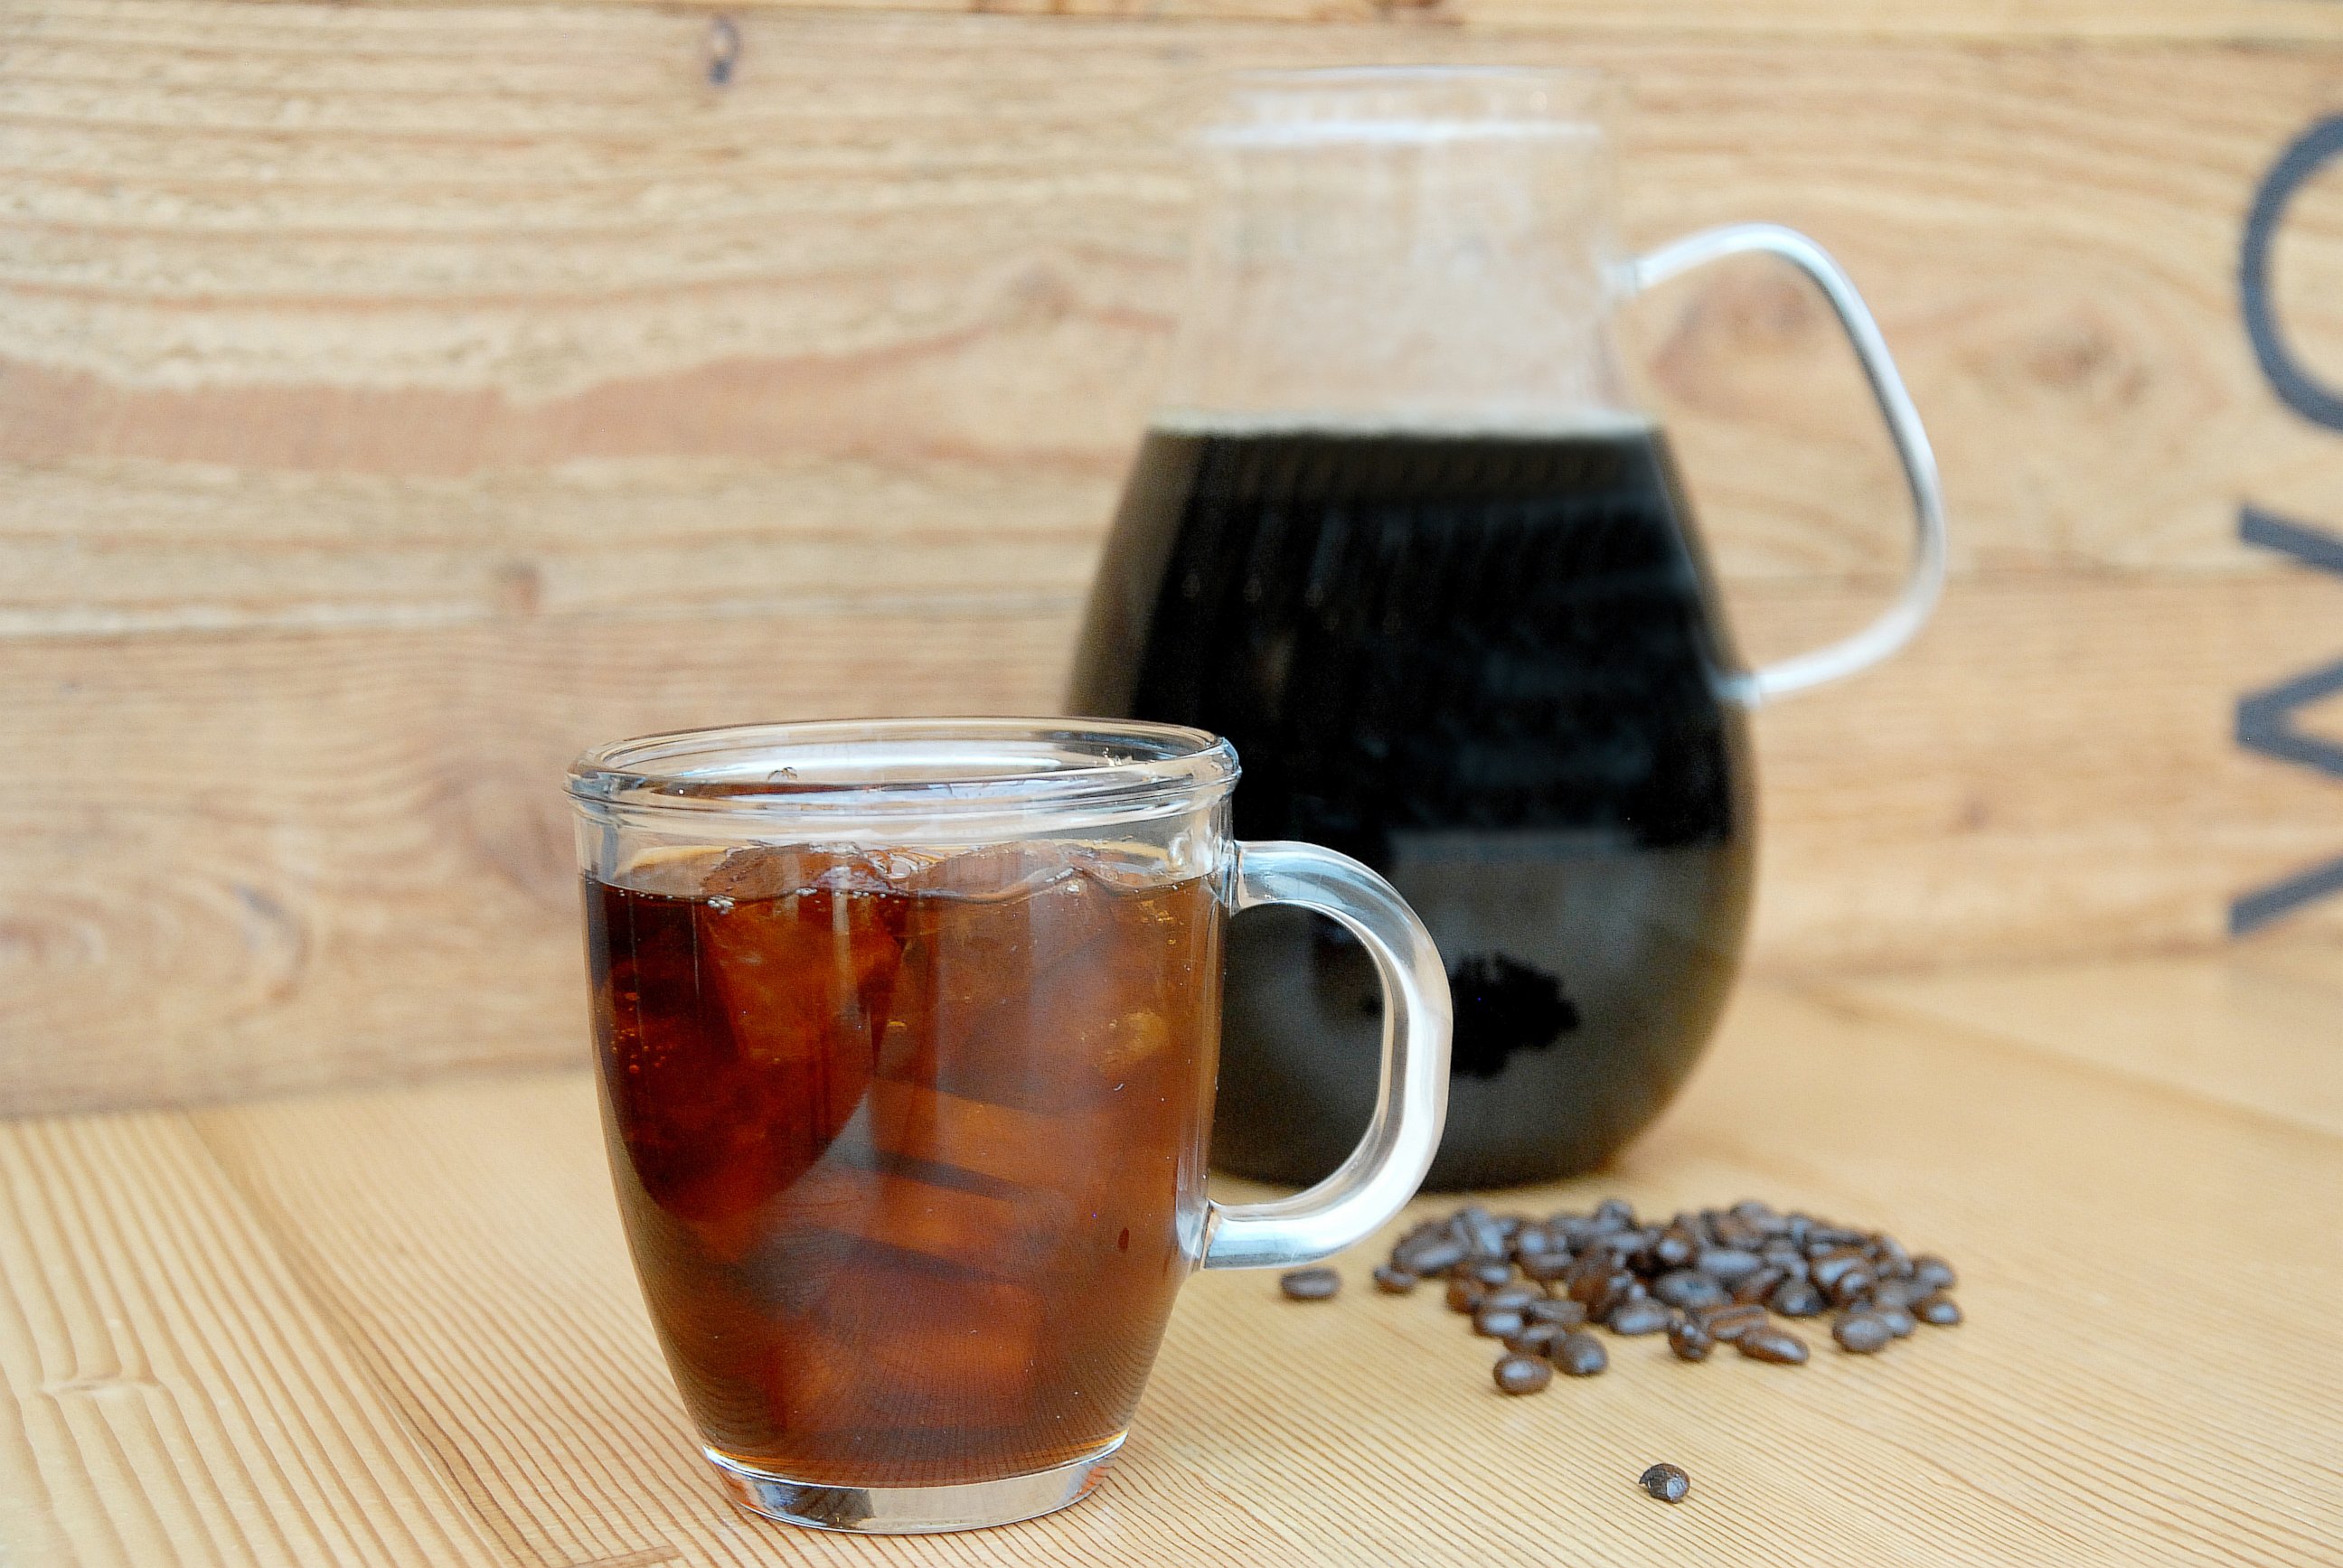 PHOTO: Starbucks is adding a cold brew coffee to its menu.